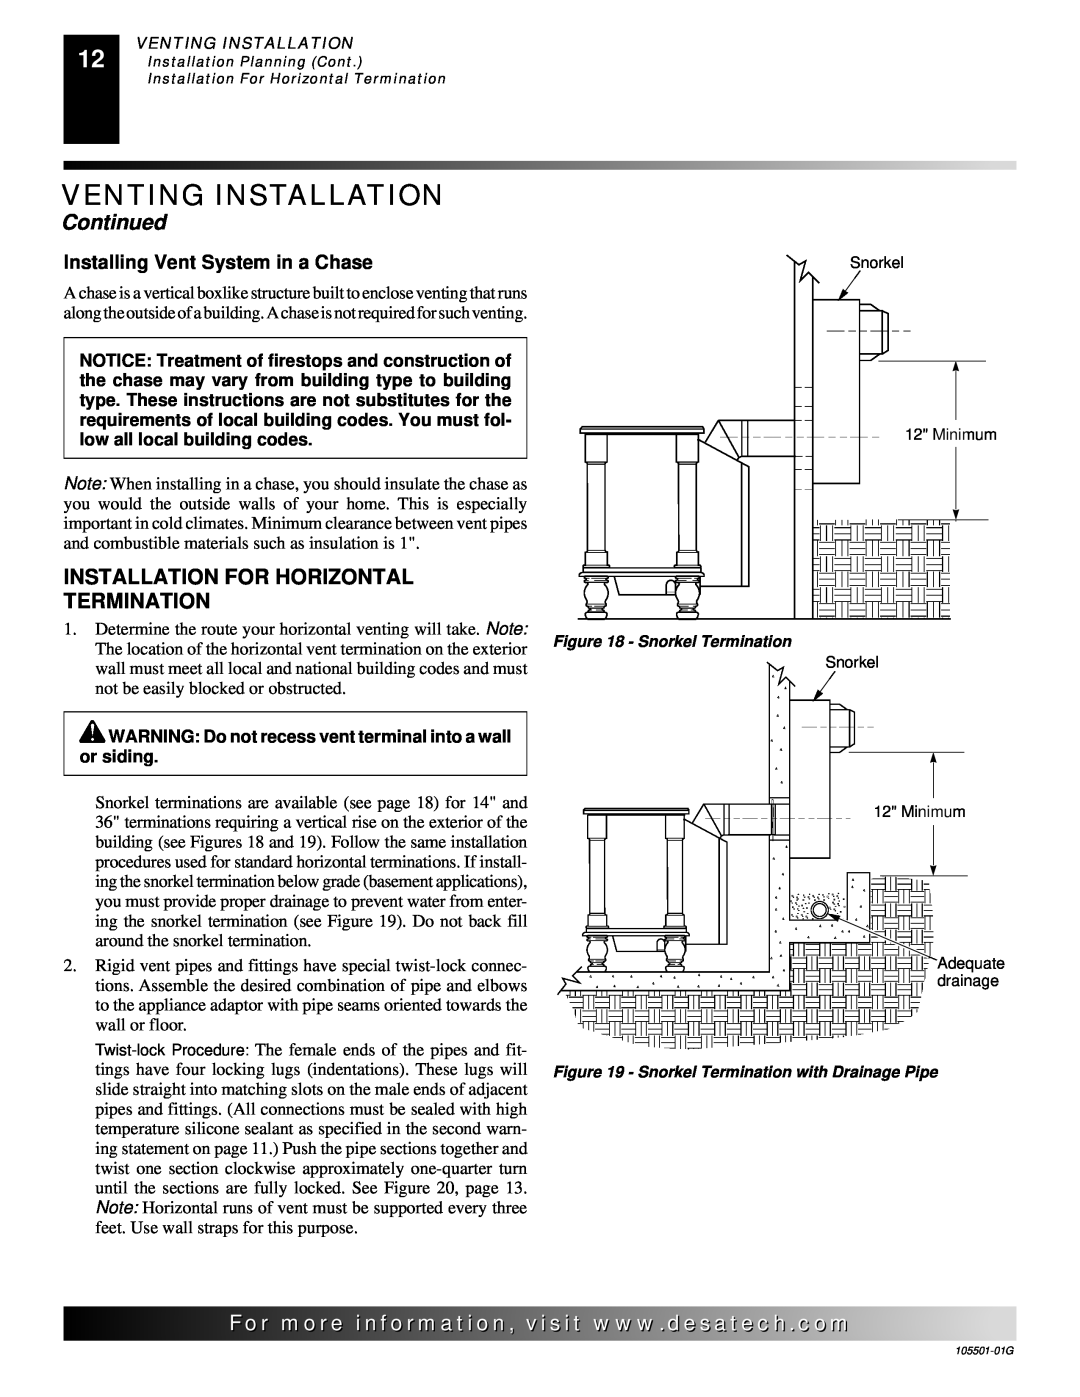 Desa Tech CDVBNC, CDVBPC Continued, Installation For Horizontal Termination, For..com, Installing Vent System in a Chase 